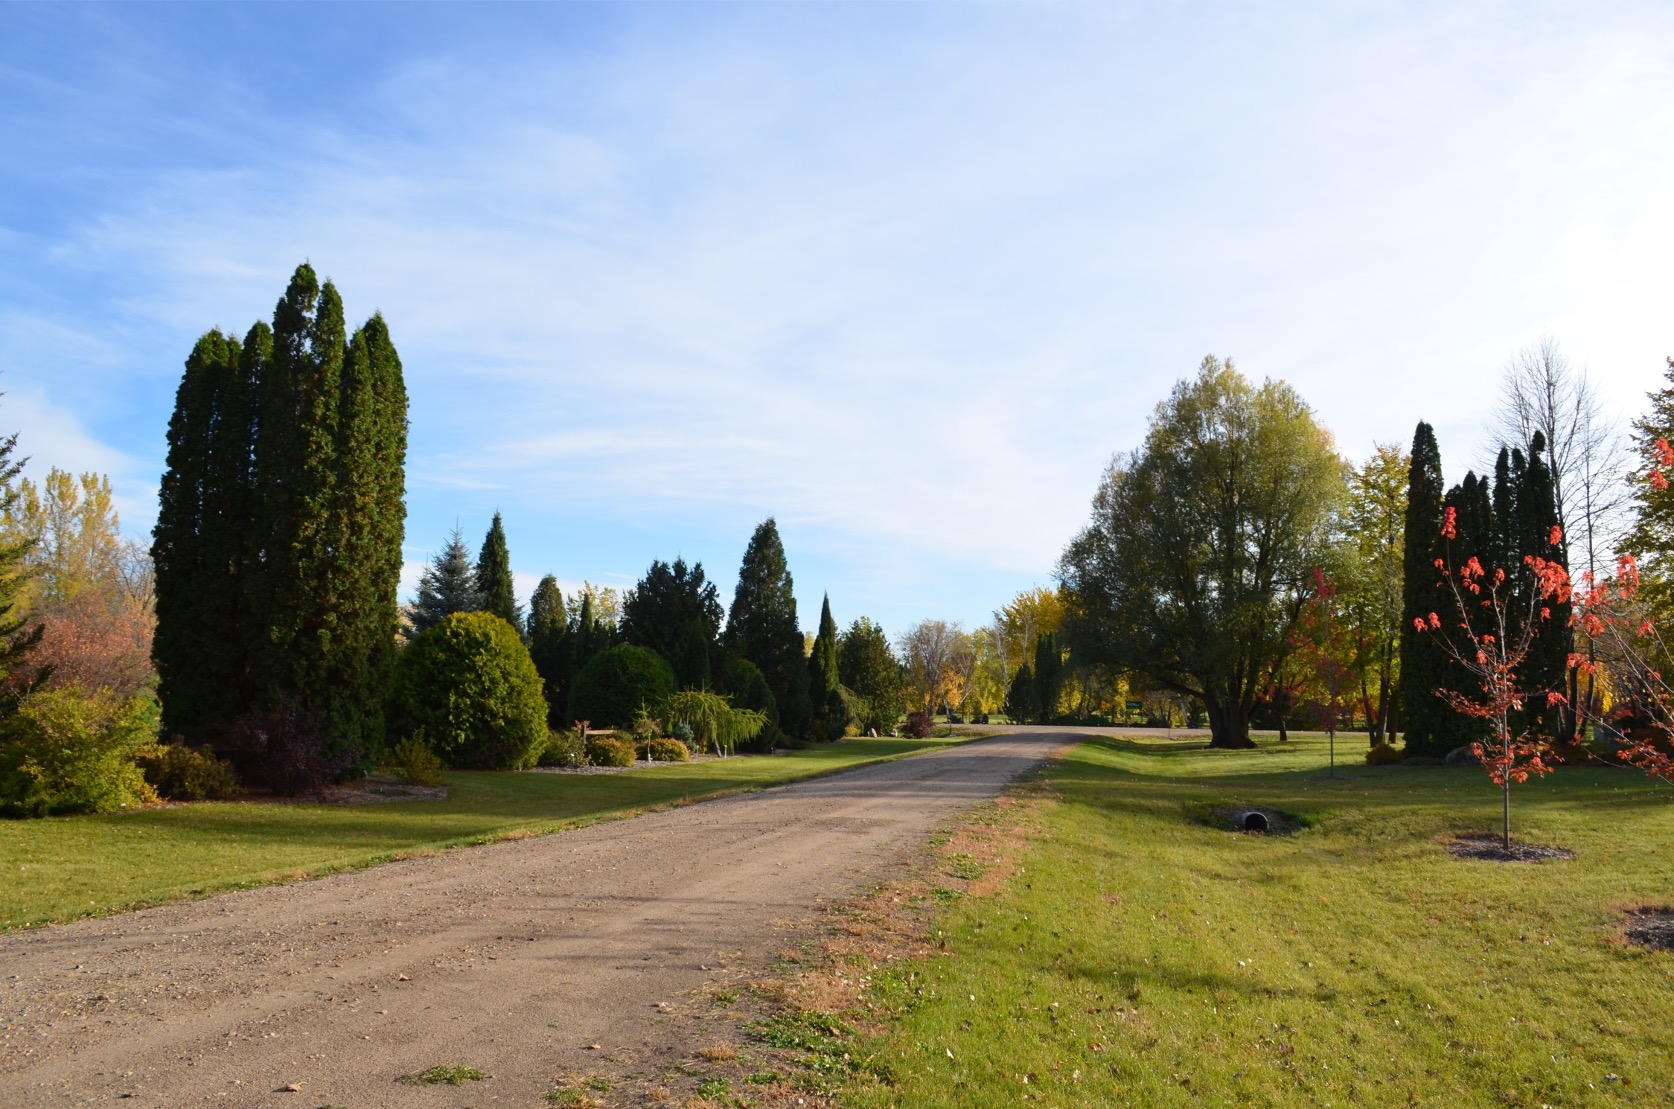 gravel road with various trees and shrubs on each side